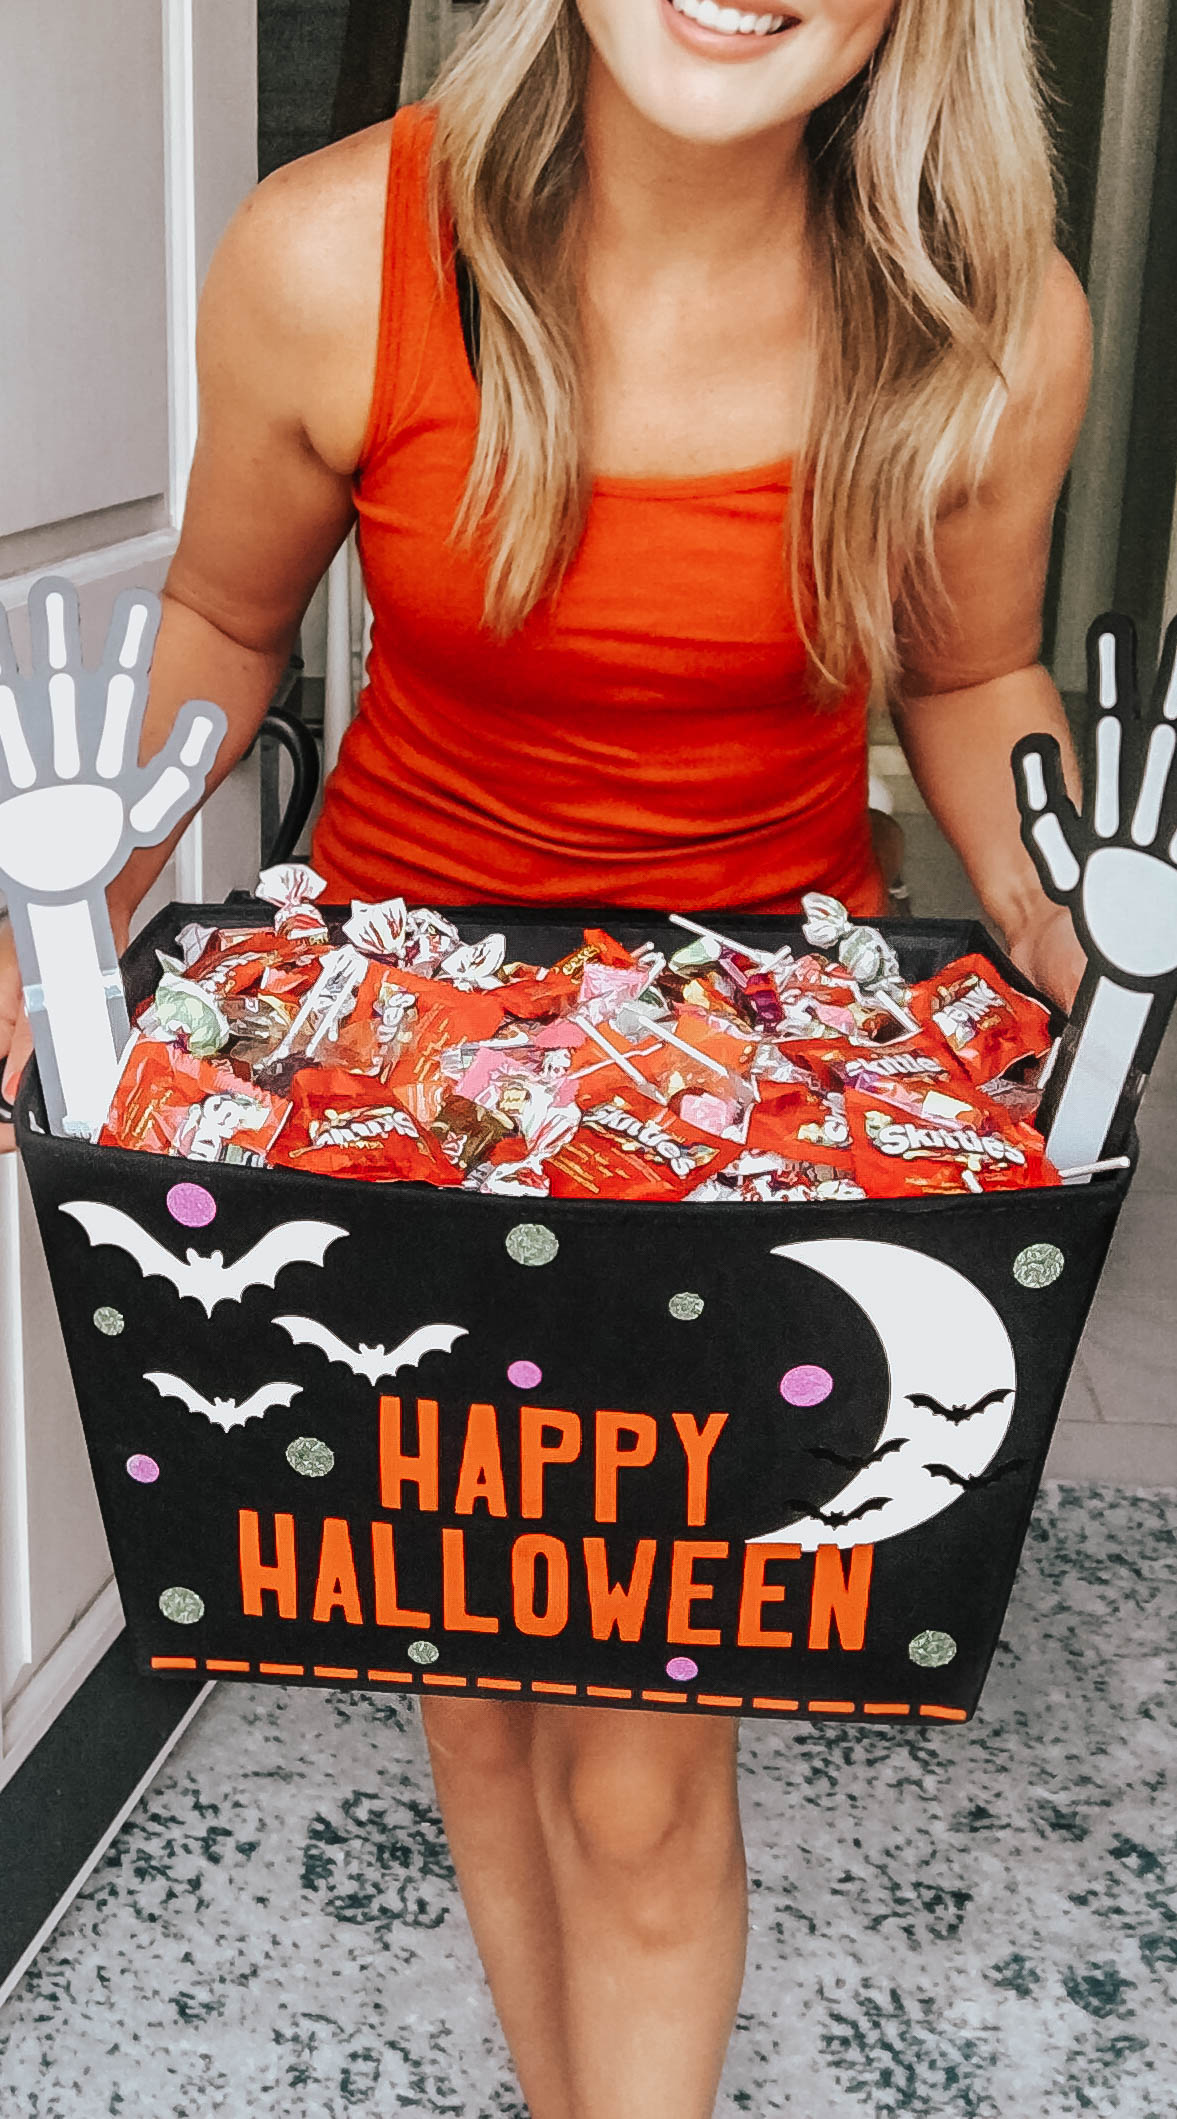 DIY Halloween Idea: How To Create A Trick or Treat Candy Bin With Heat Transfer Vinyl